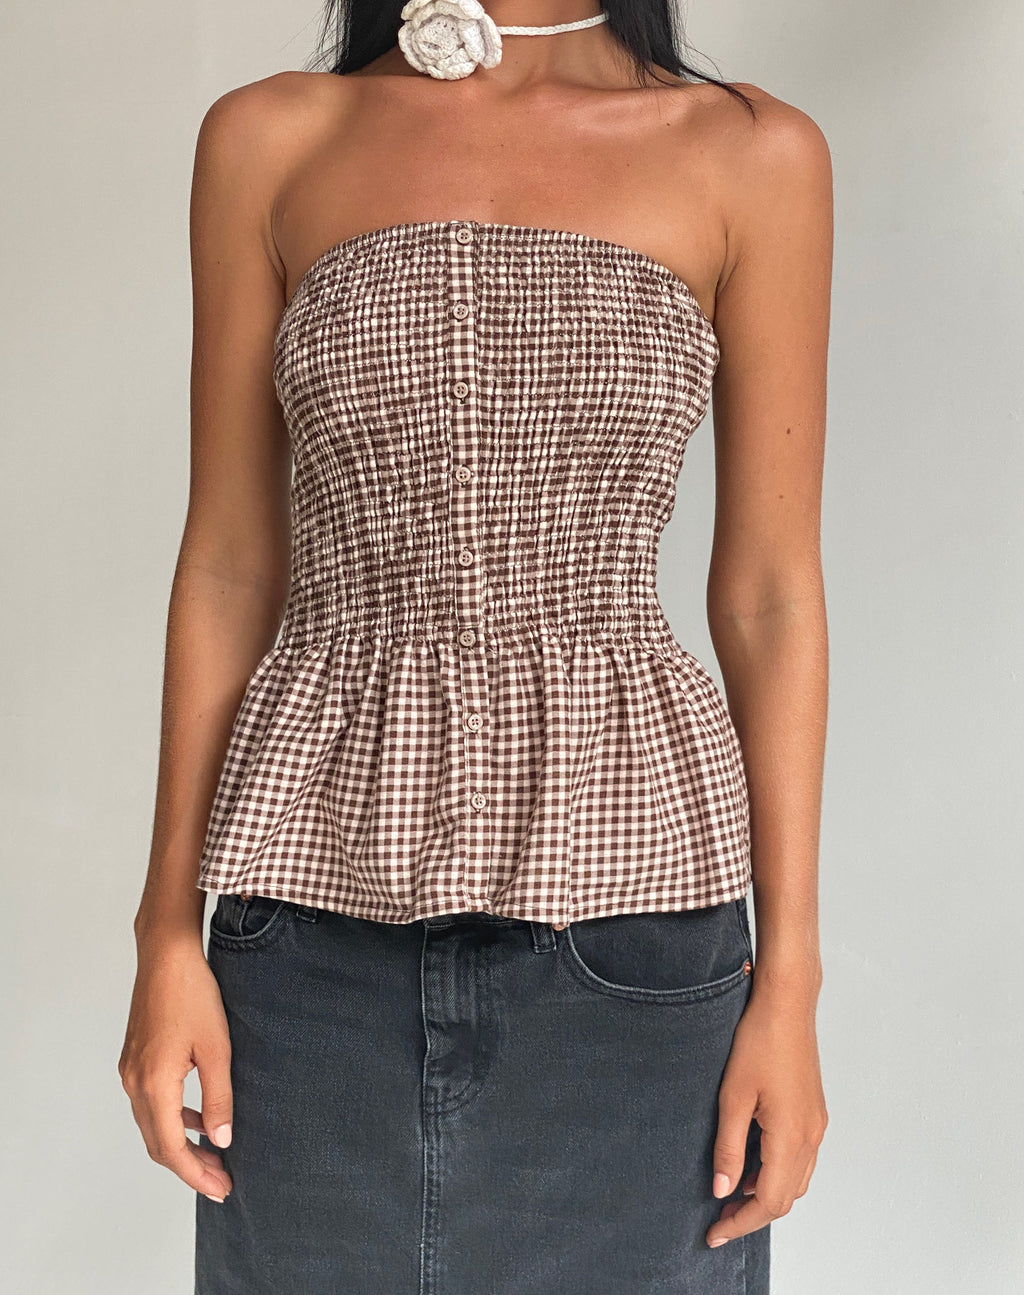 Soter Shirred Bandeau Top in Mini Gingham